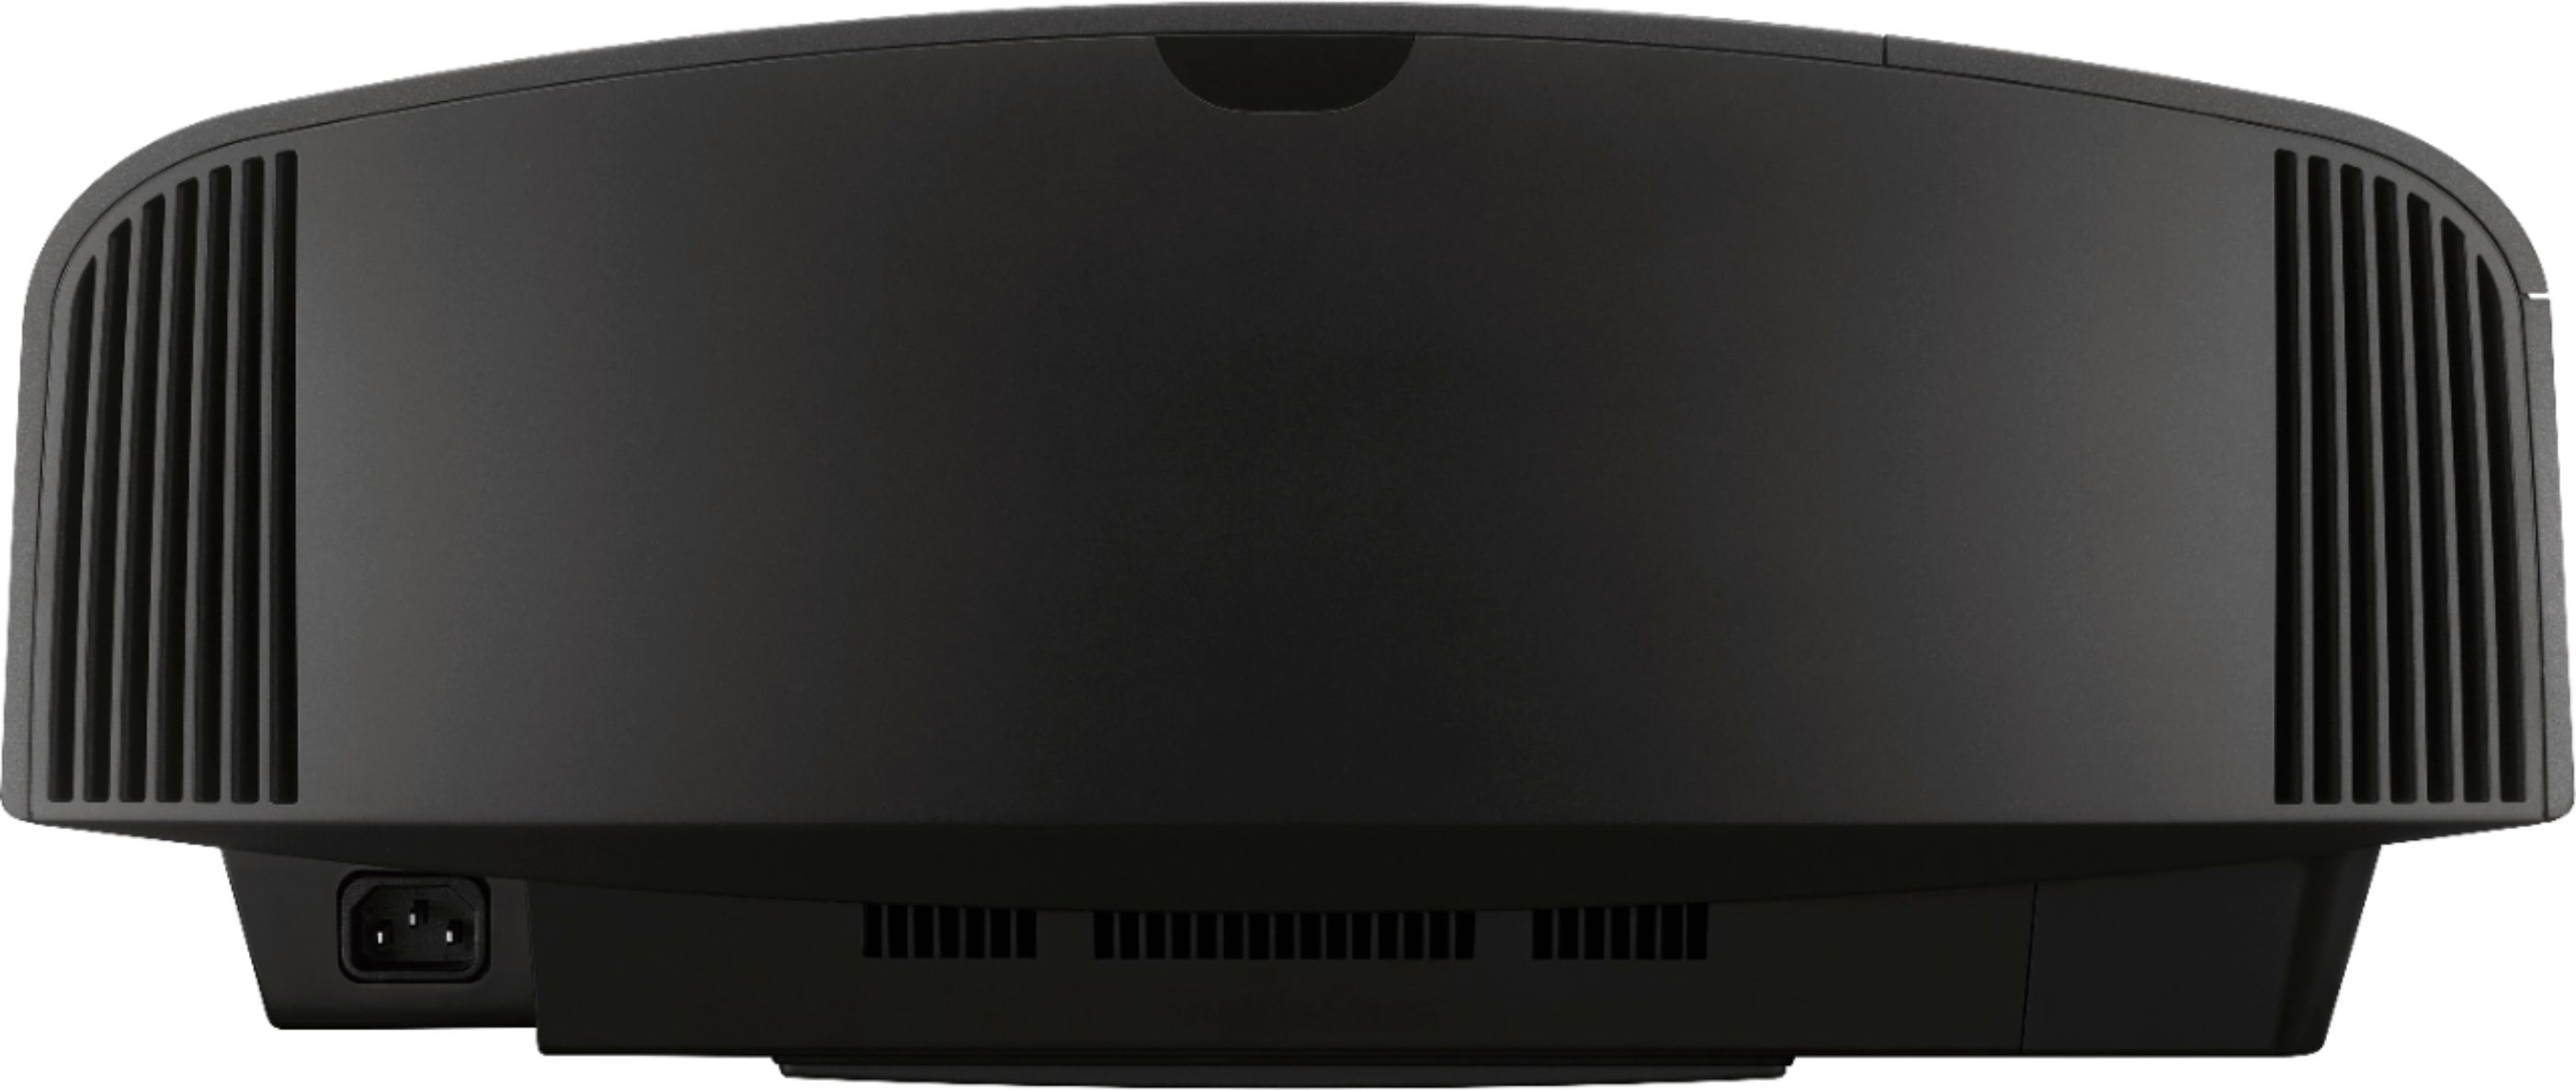 Back View: Sony - 4K HDR Home Theater Projector - Black